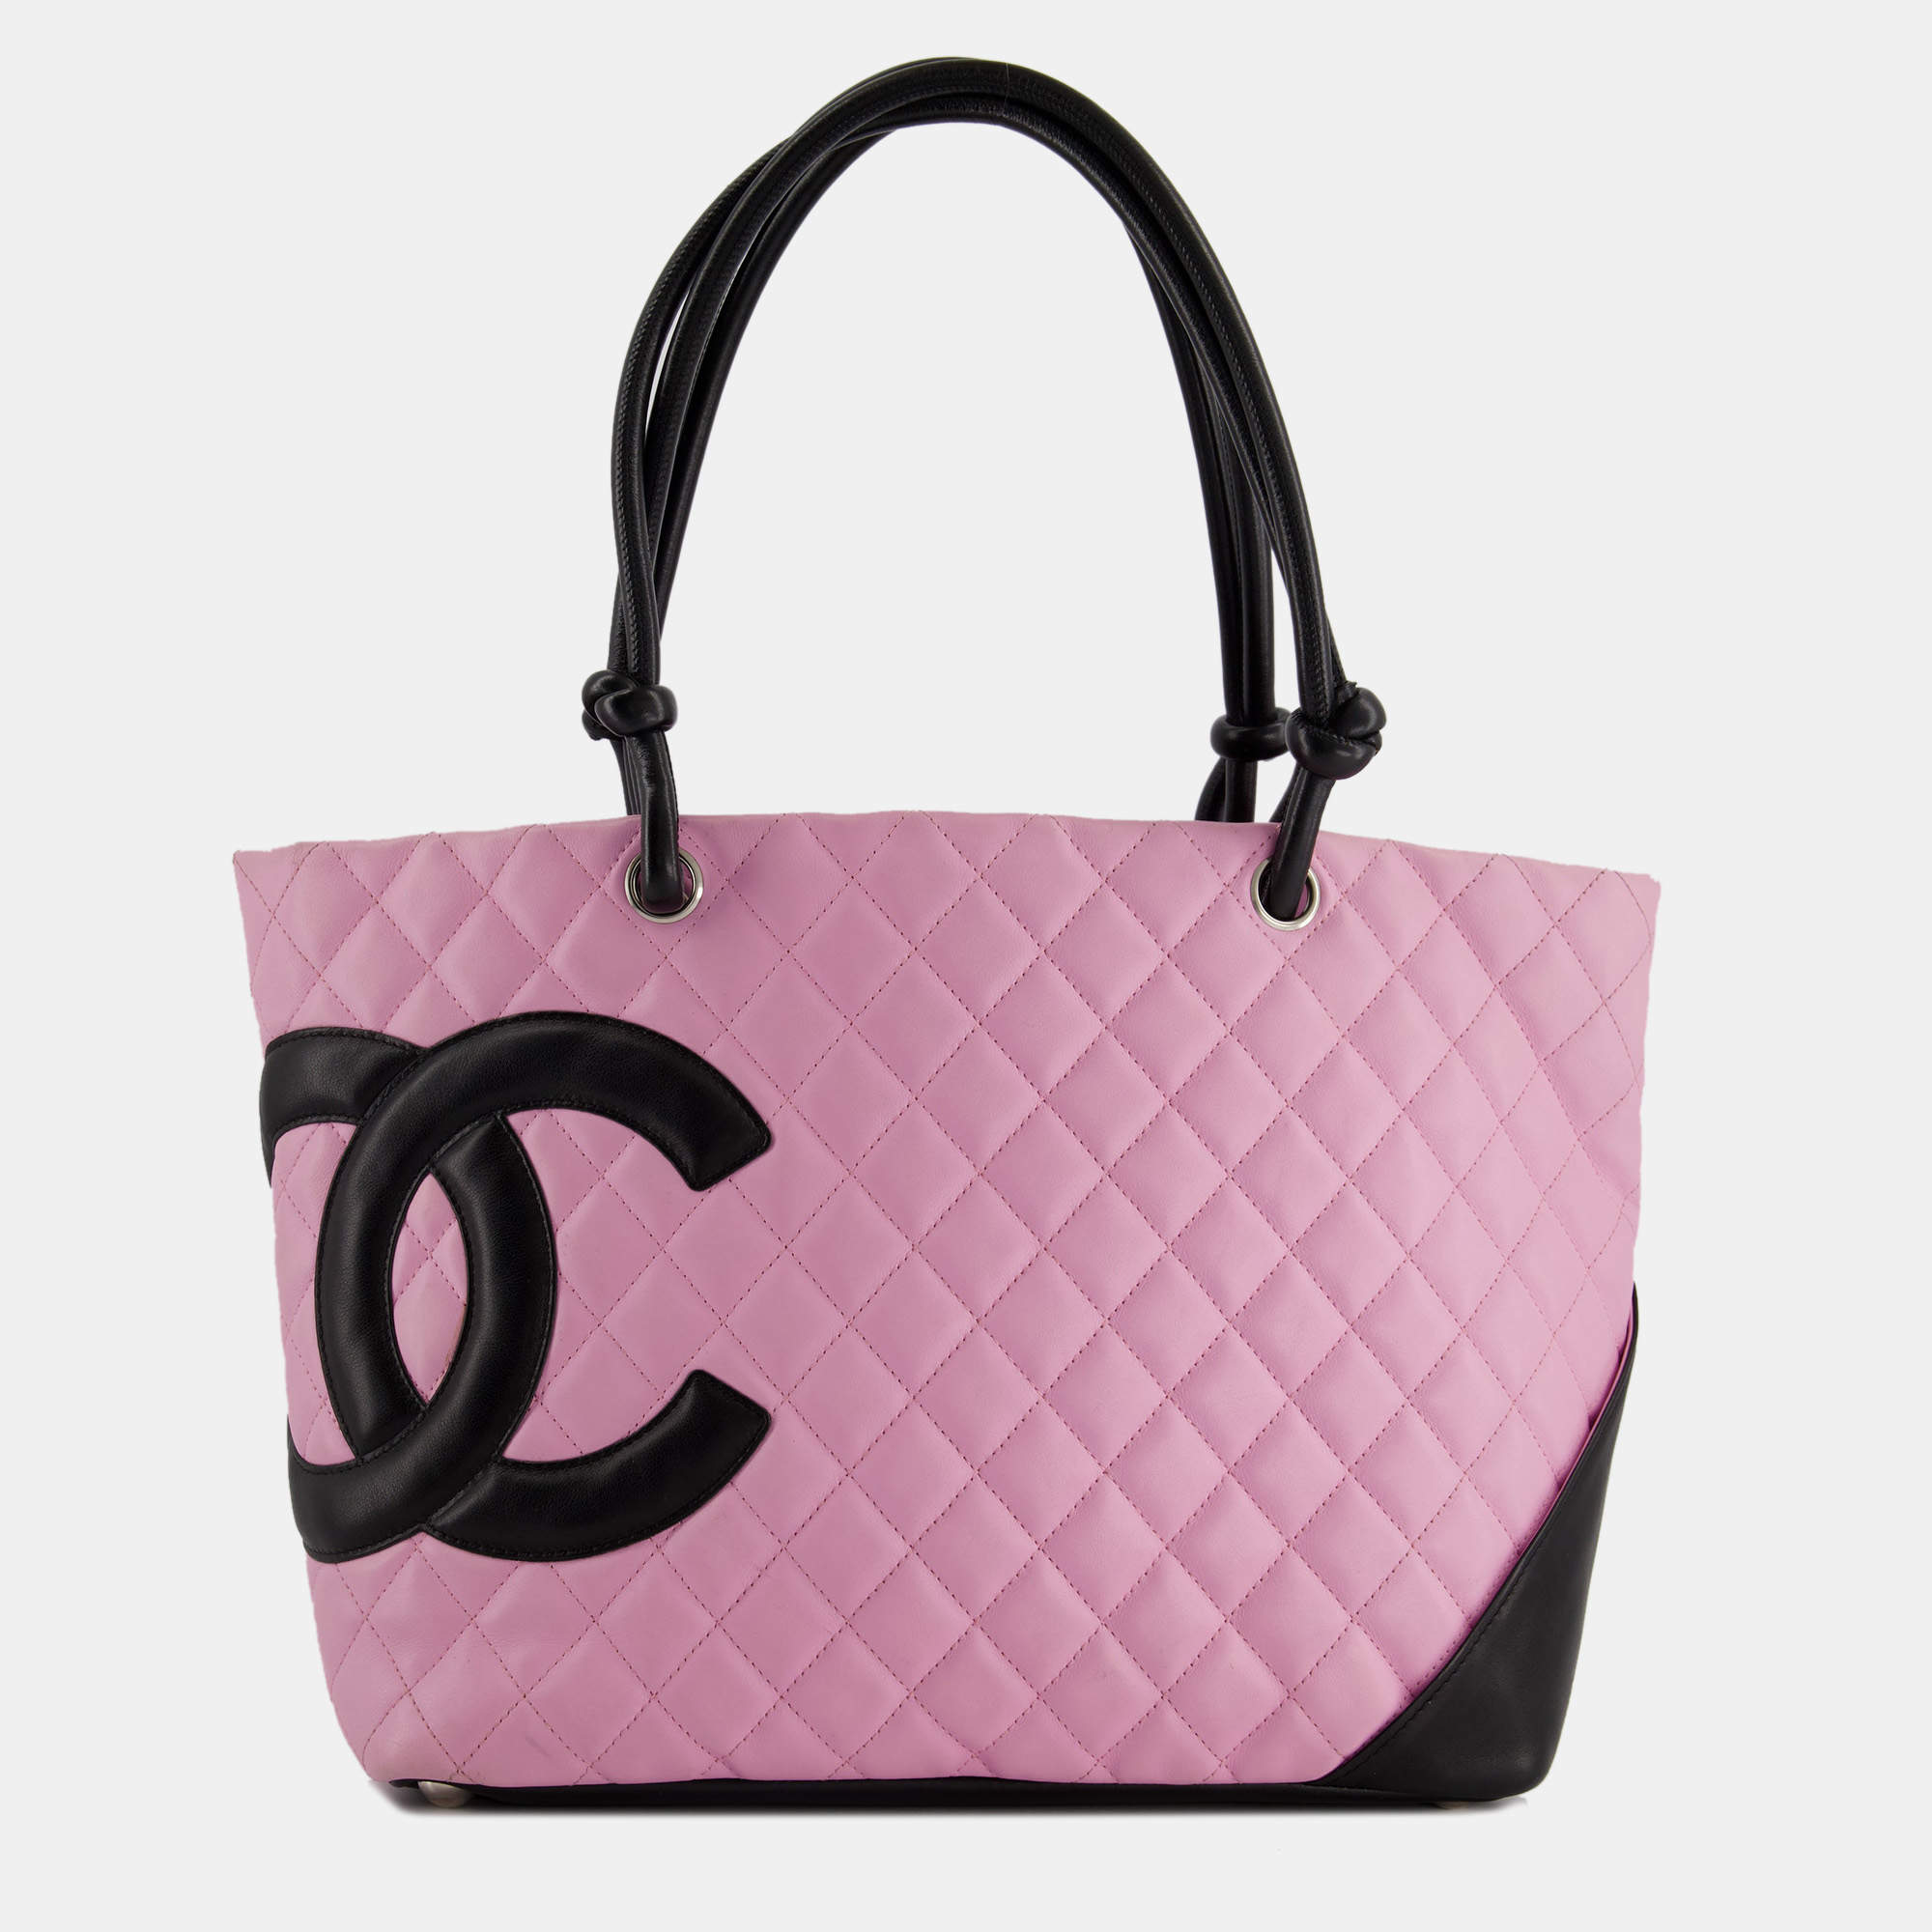 Chanel Pink Cambon CC Knot Quilted Handbag In Lambskin Leather and Silver Hardware  Chanel